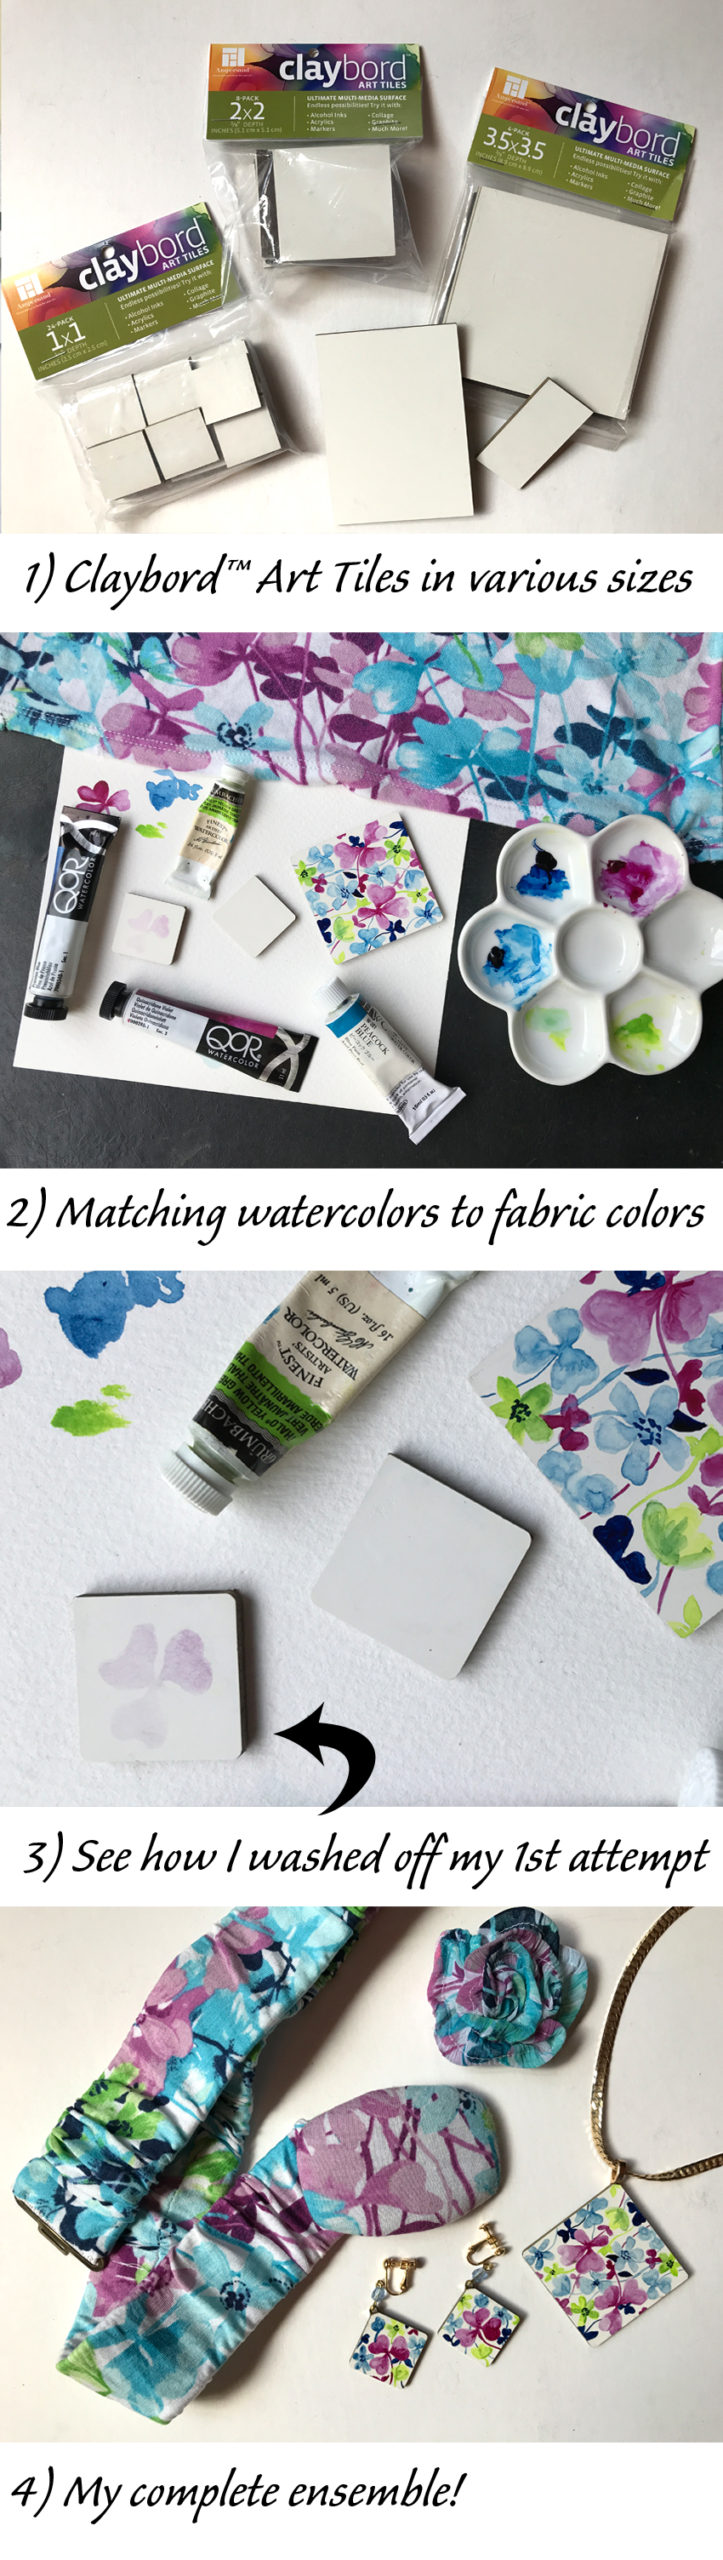 collage of steps for using watercolor on Claybord Art Tiles